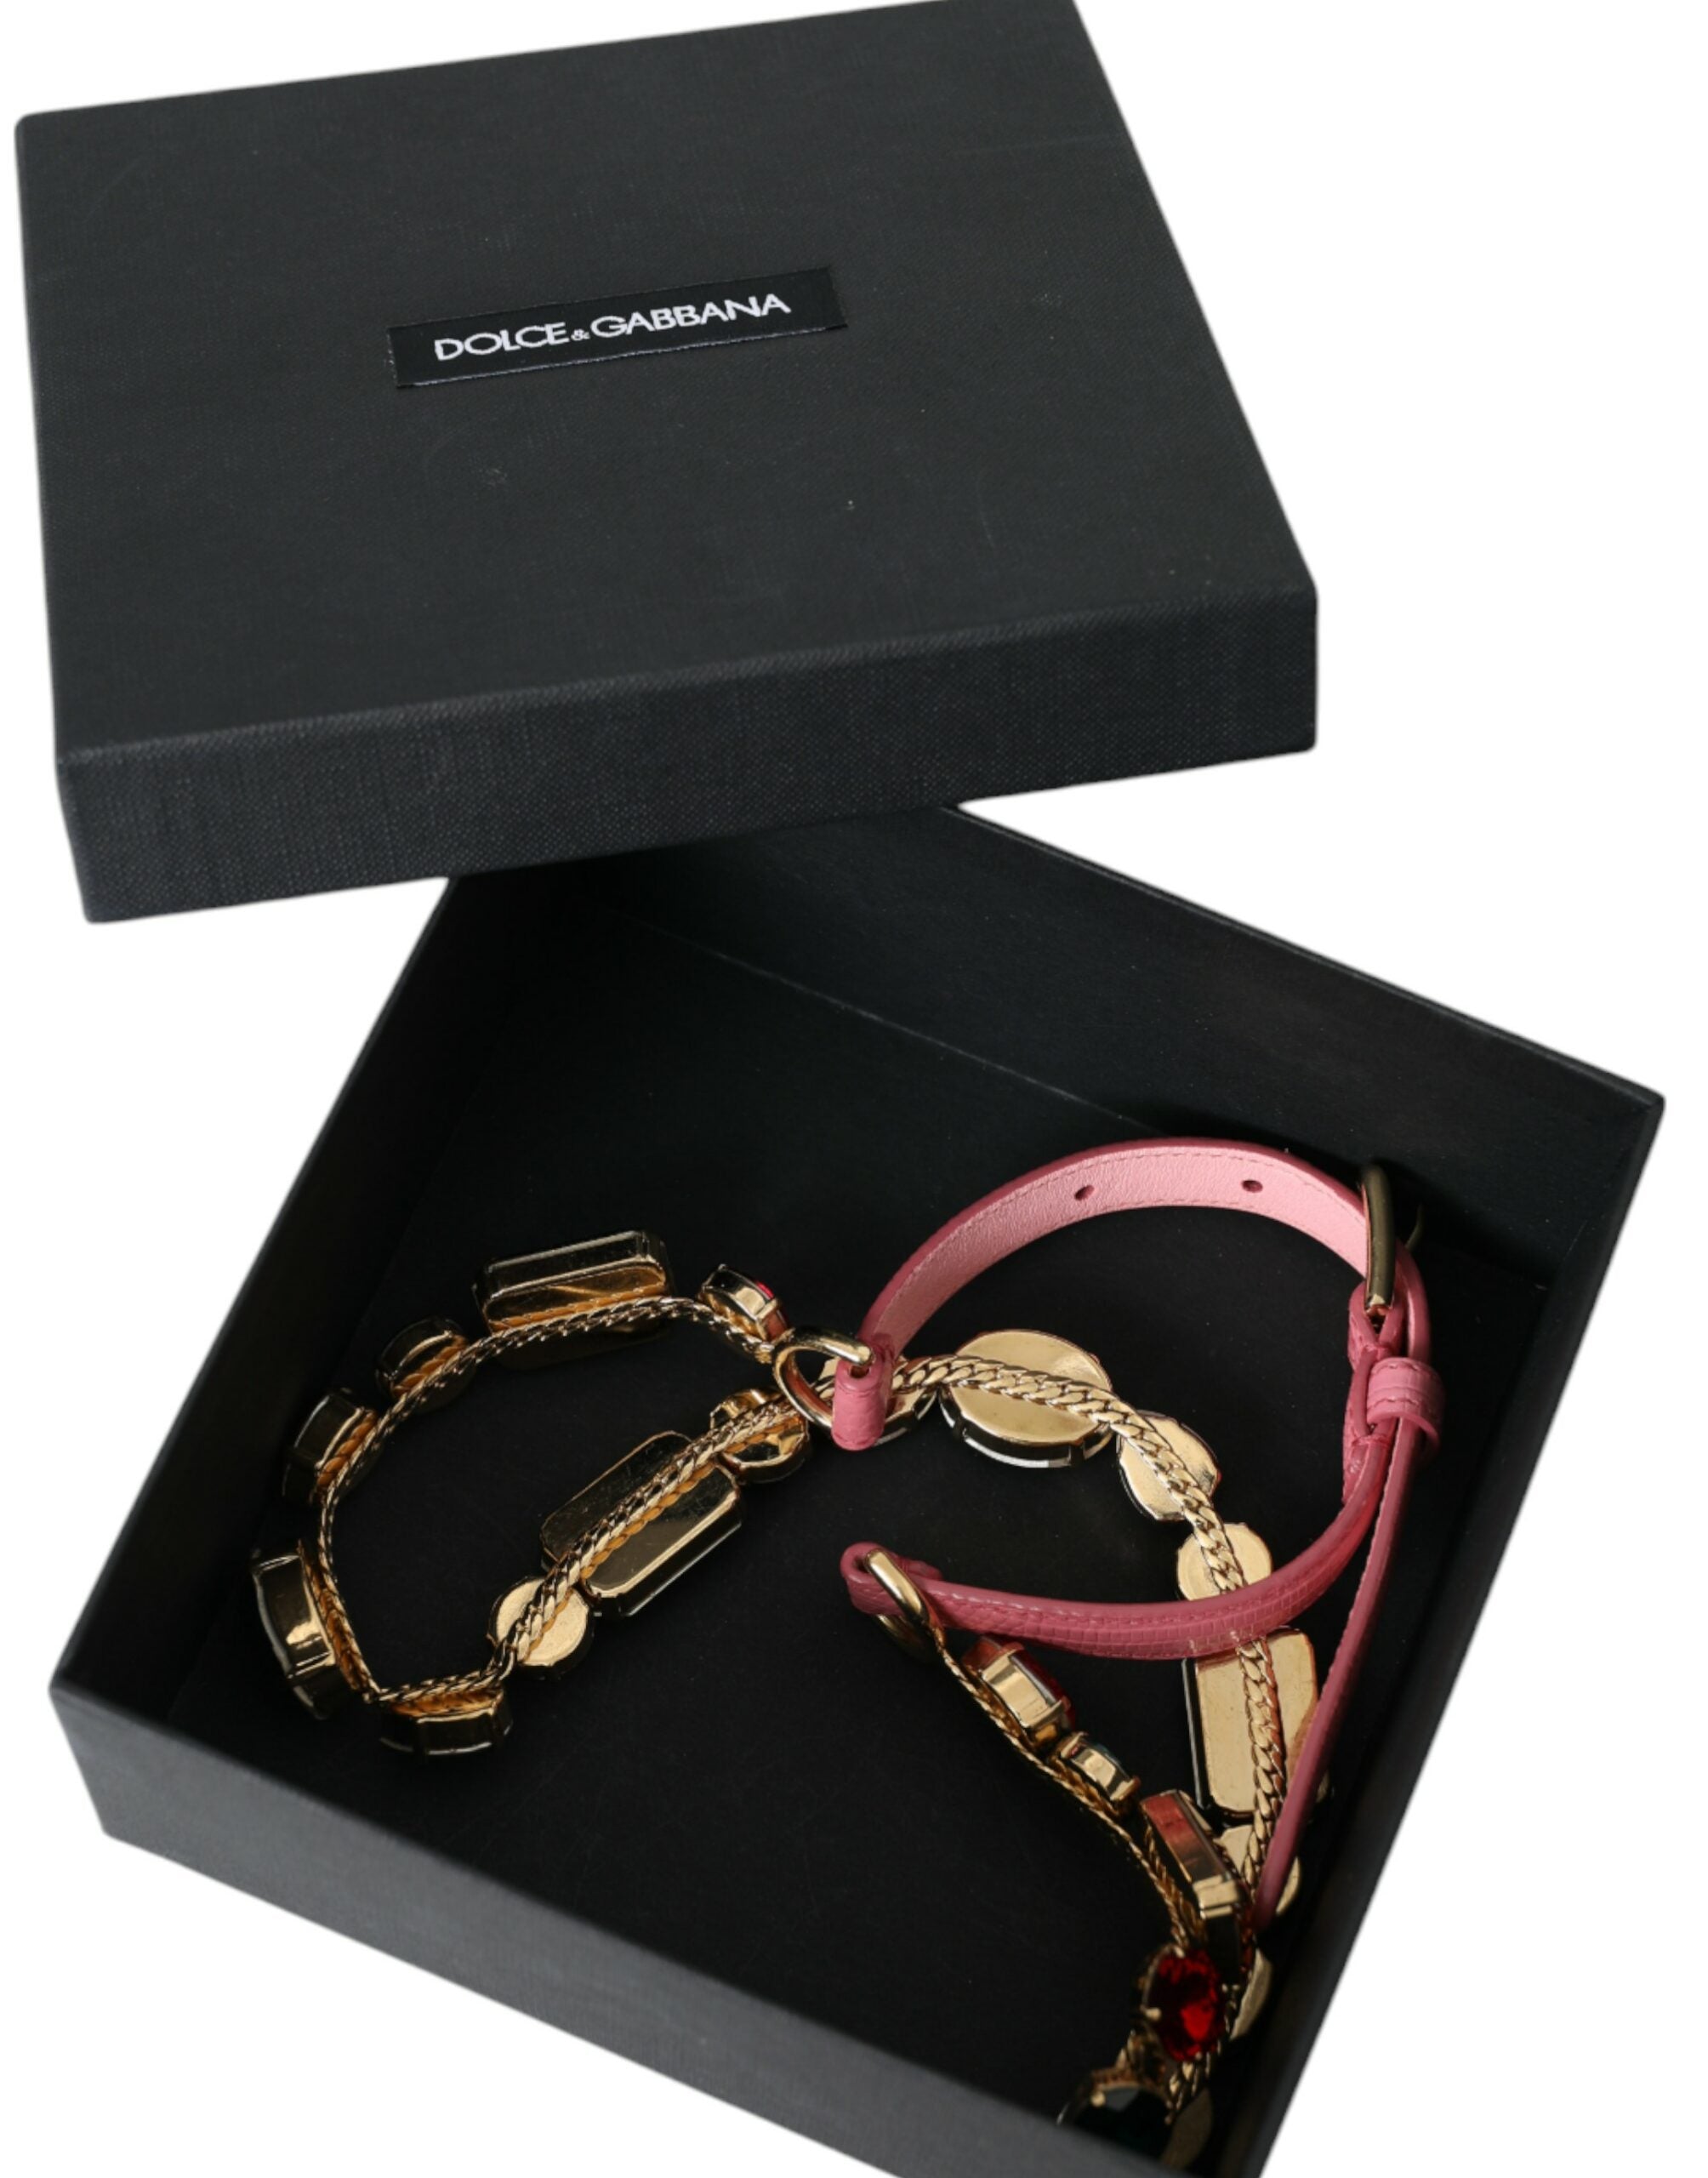 Pink Leather Crystal Chain Embellished Belt - Divitiae Glamour